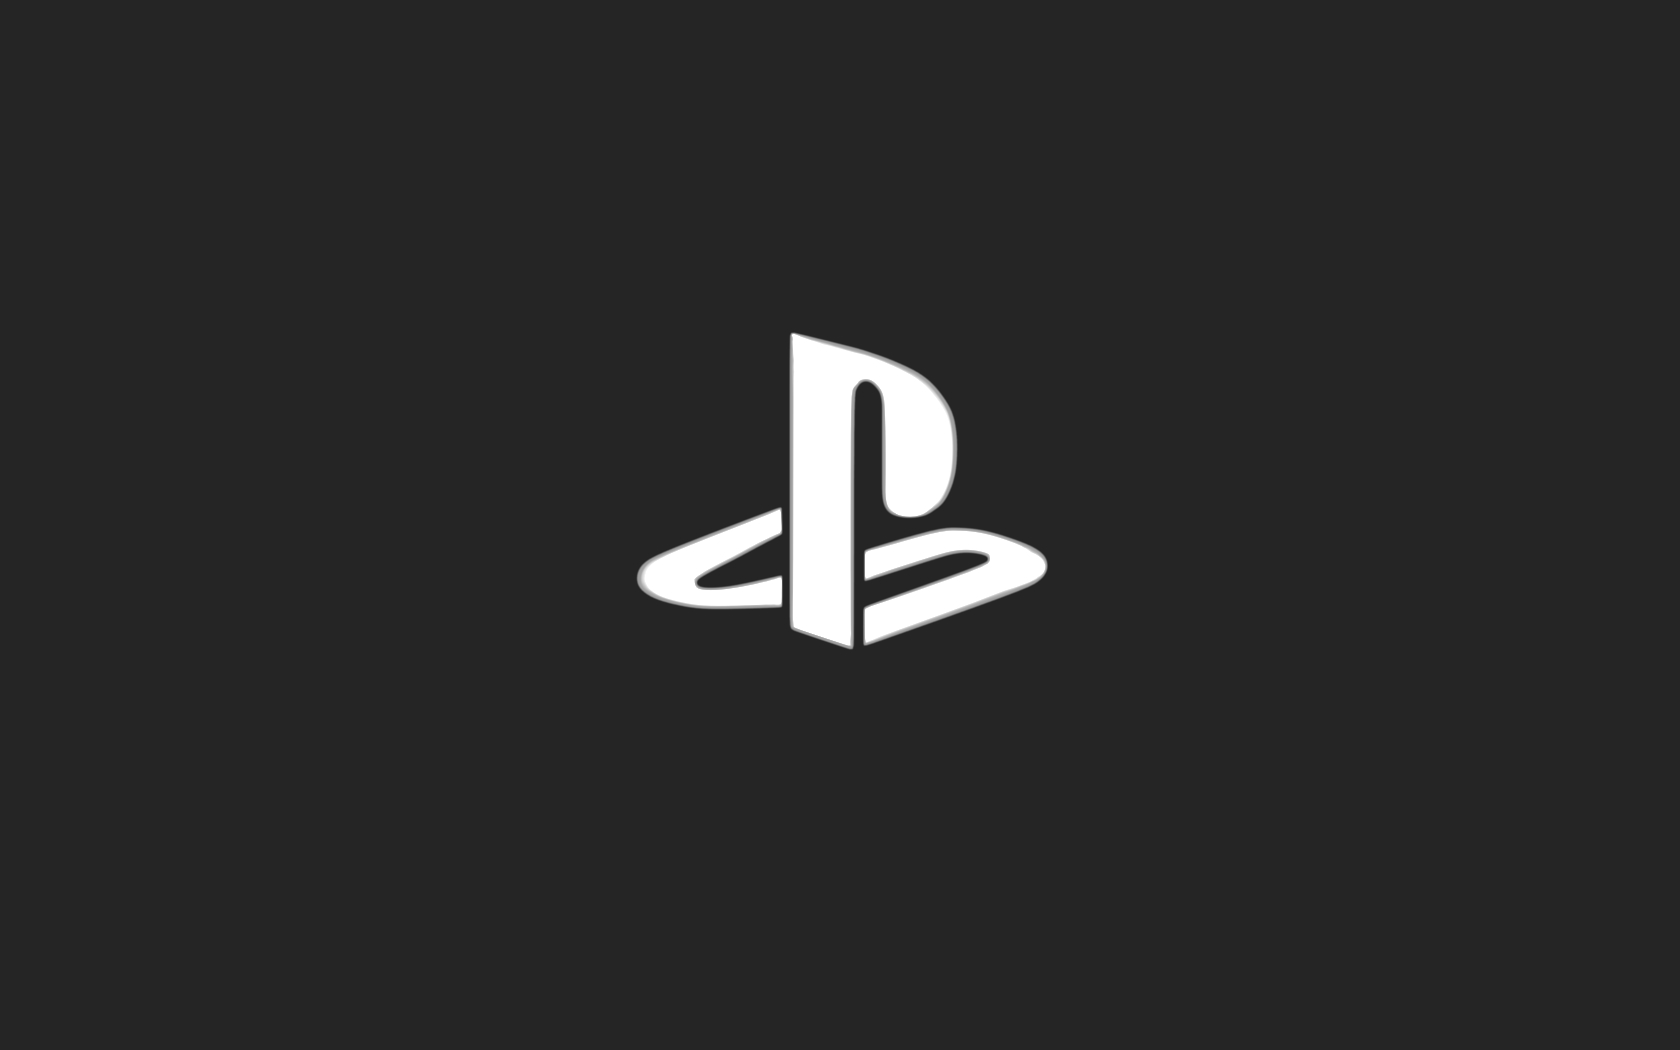 playstation of ps wallpaper wallpapers search engine you x x